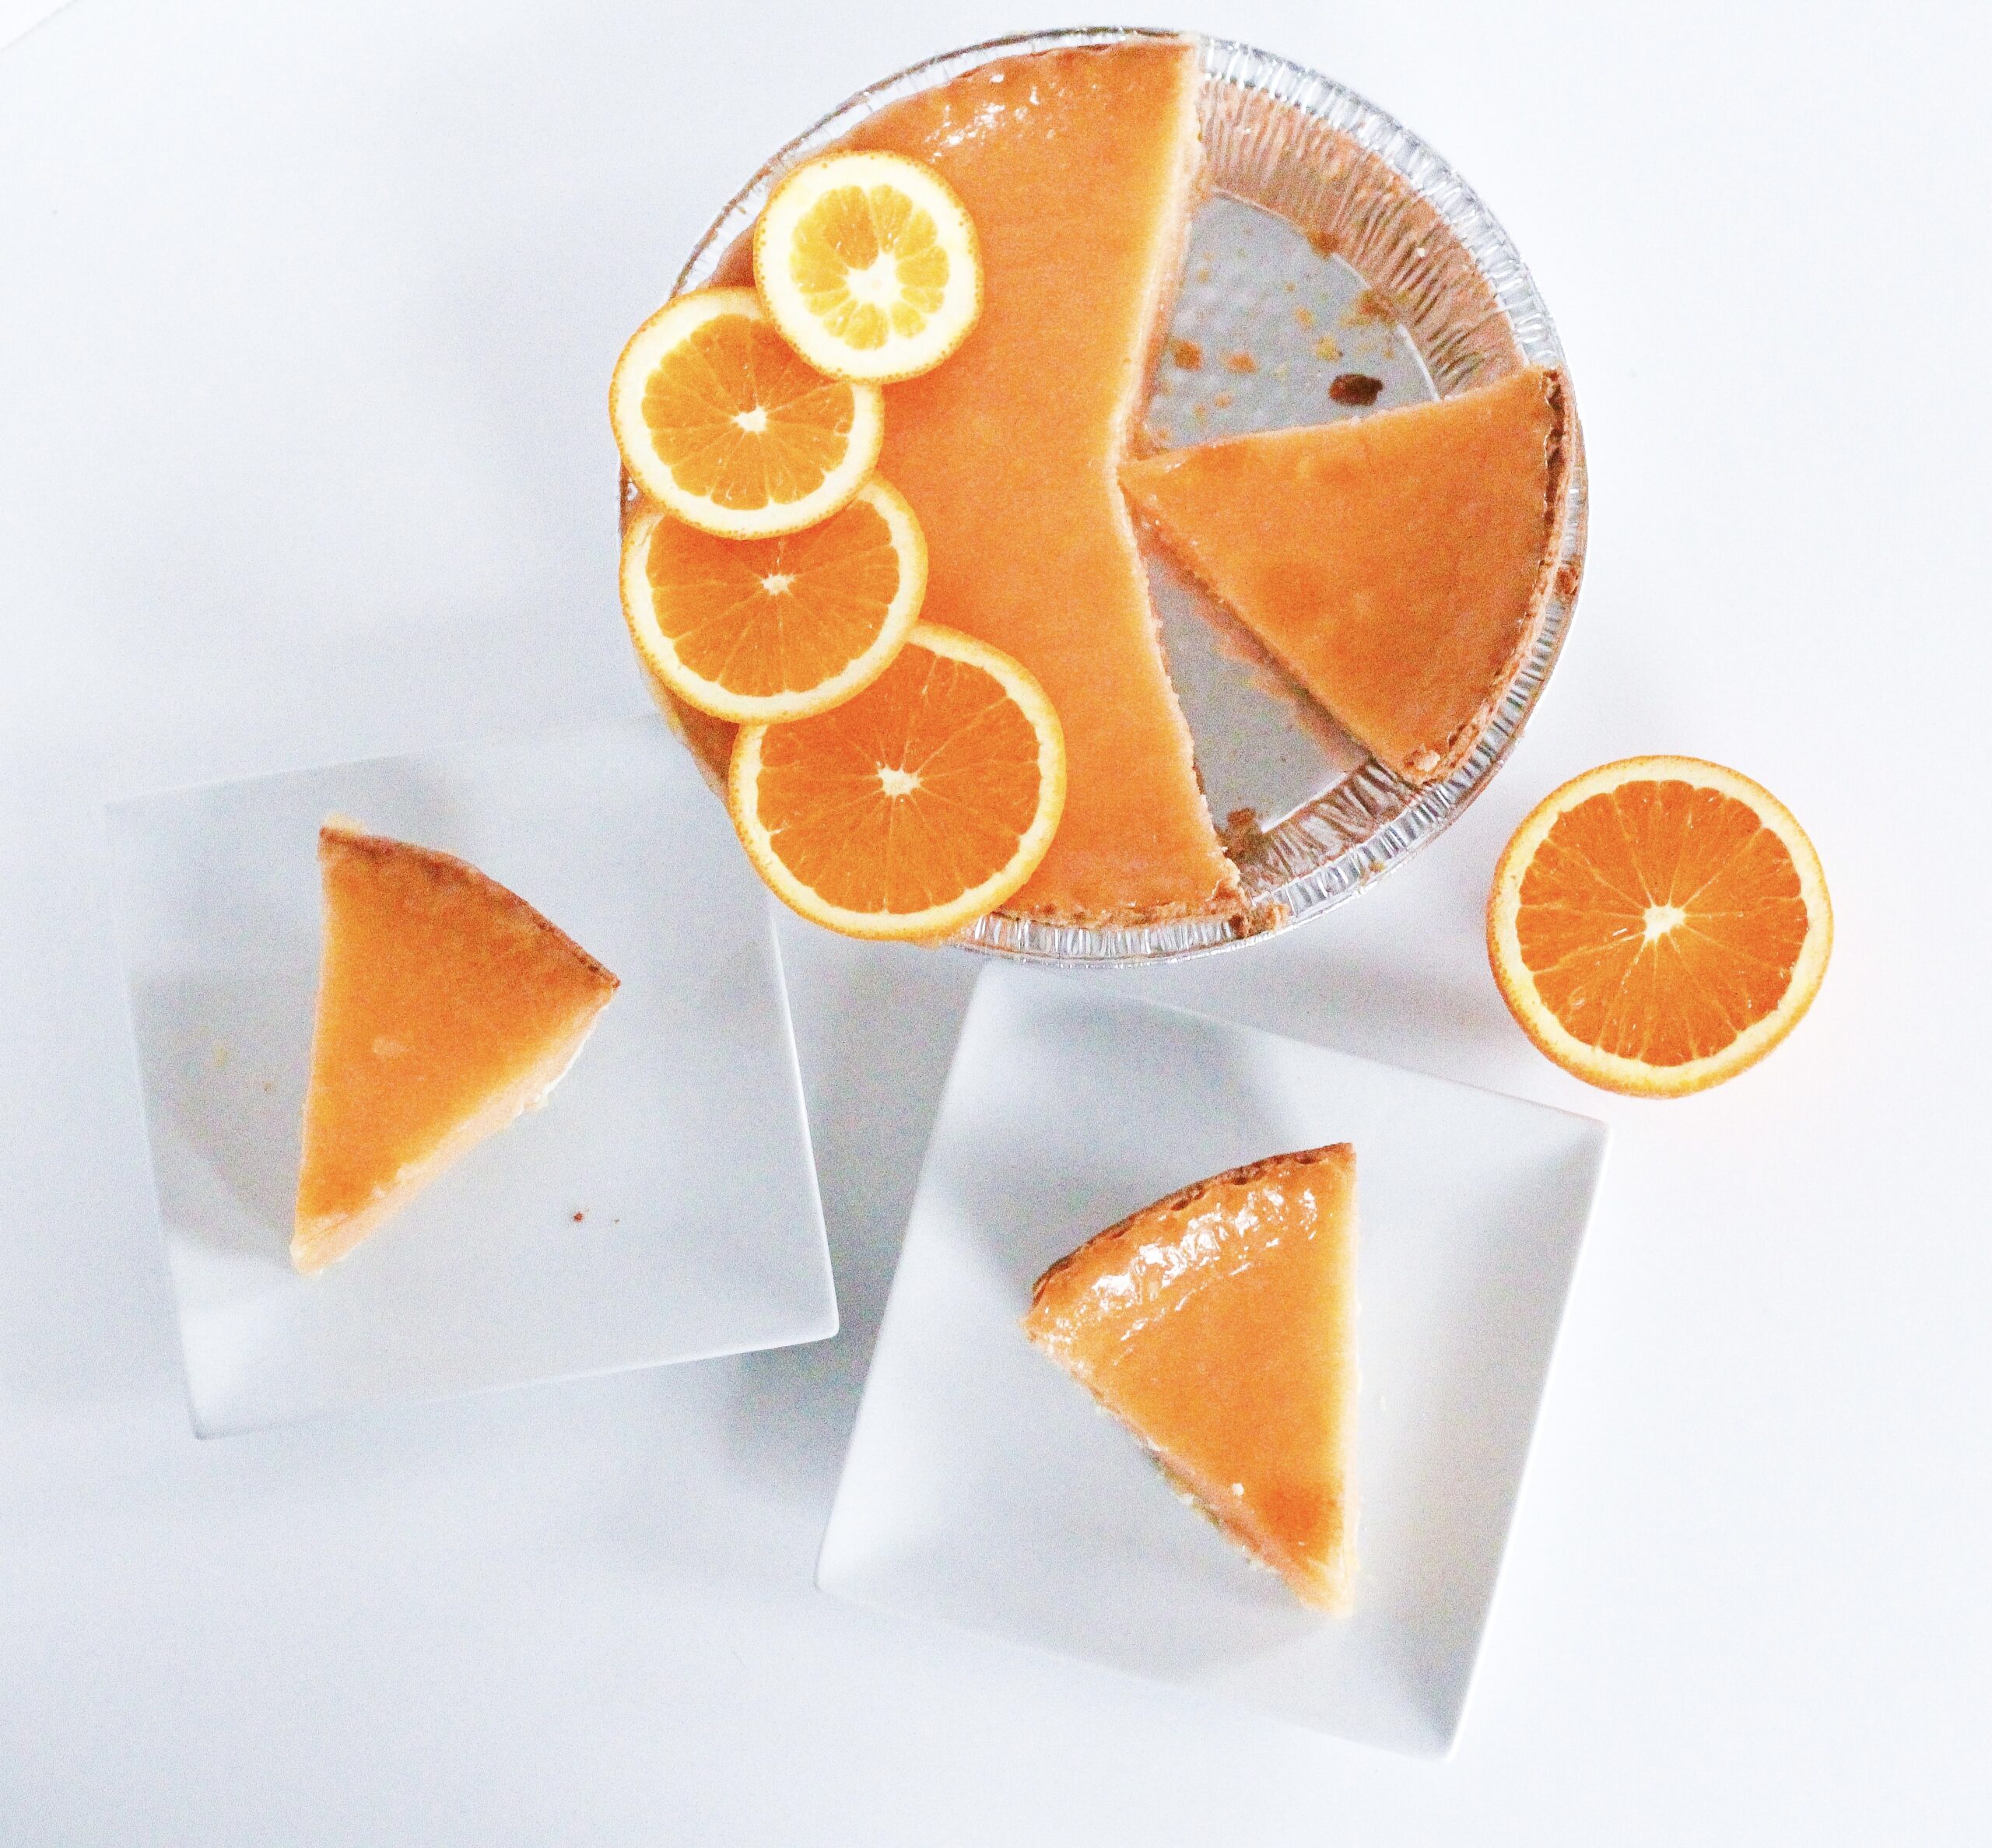 Top down view of the pie with three slices cut. One slice is in the open space in the pan where other slices have been removed. The other two slices are each on a small square white plate. There is also half an orange sitting next to the pie.